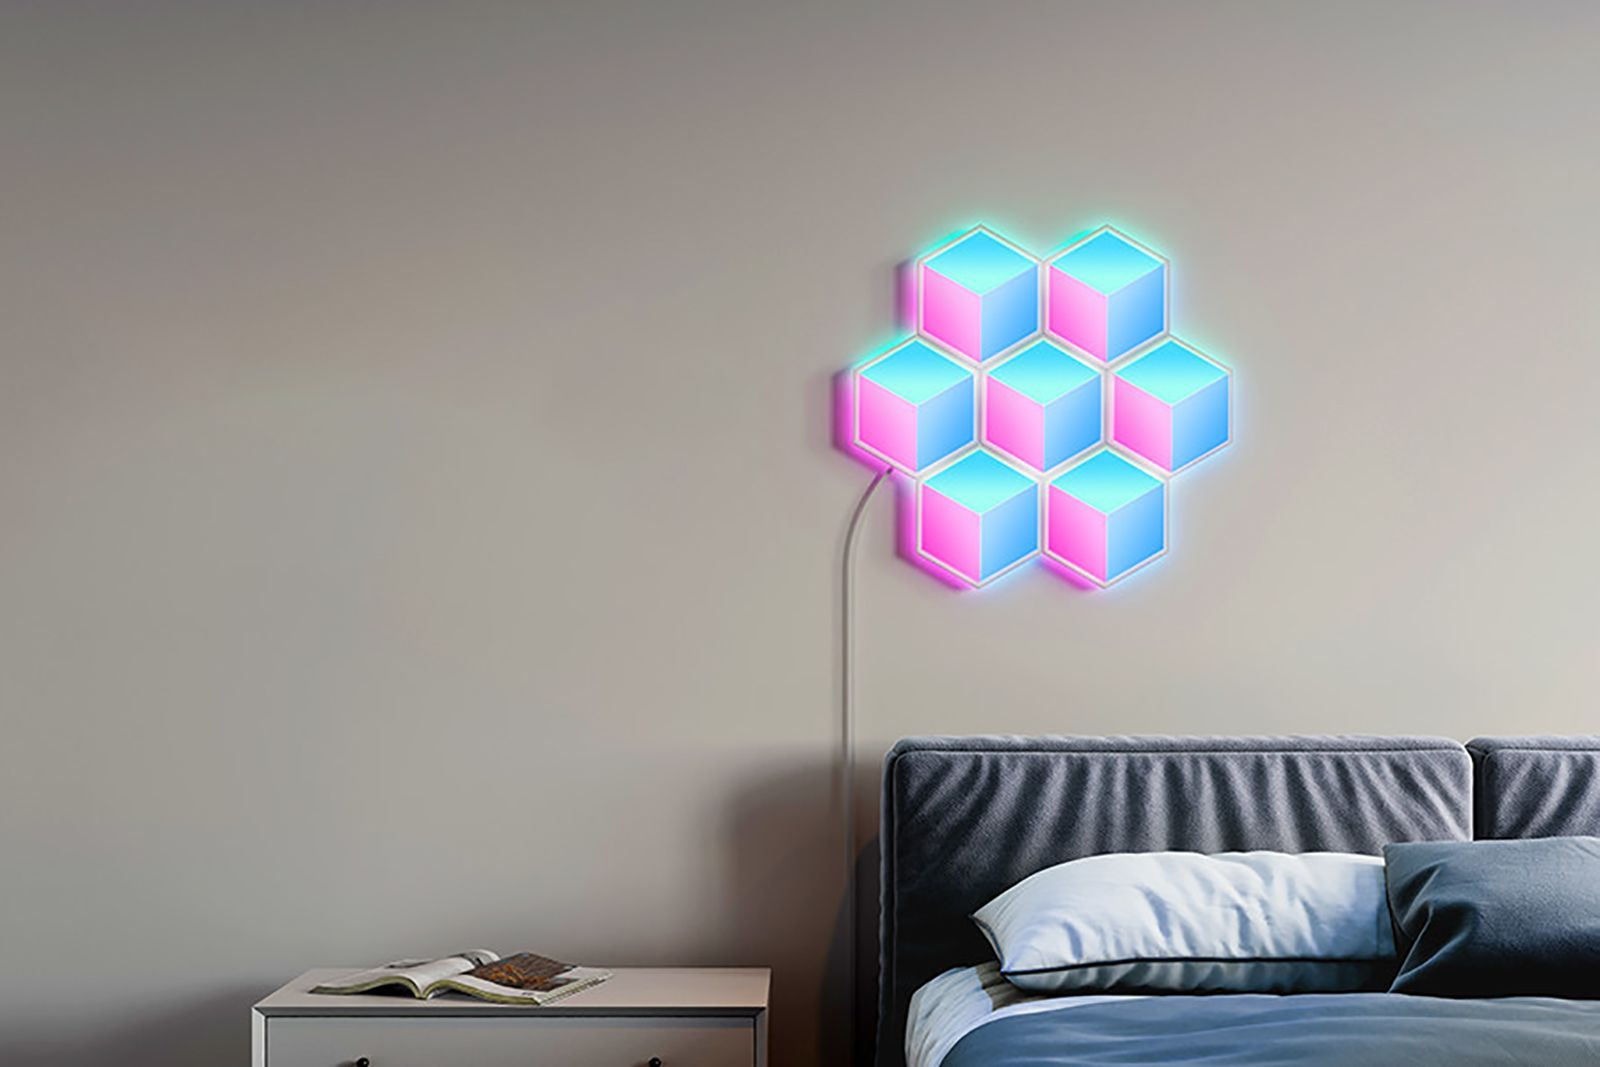 Govee unveils a new style of Hexa light panels at CES 2022 photo 2